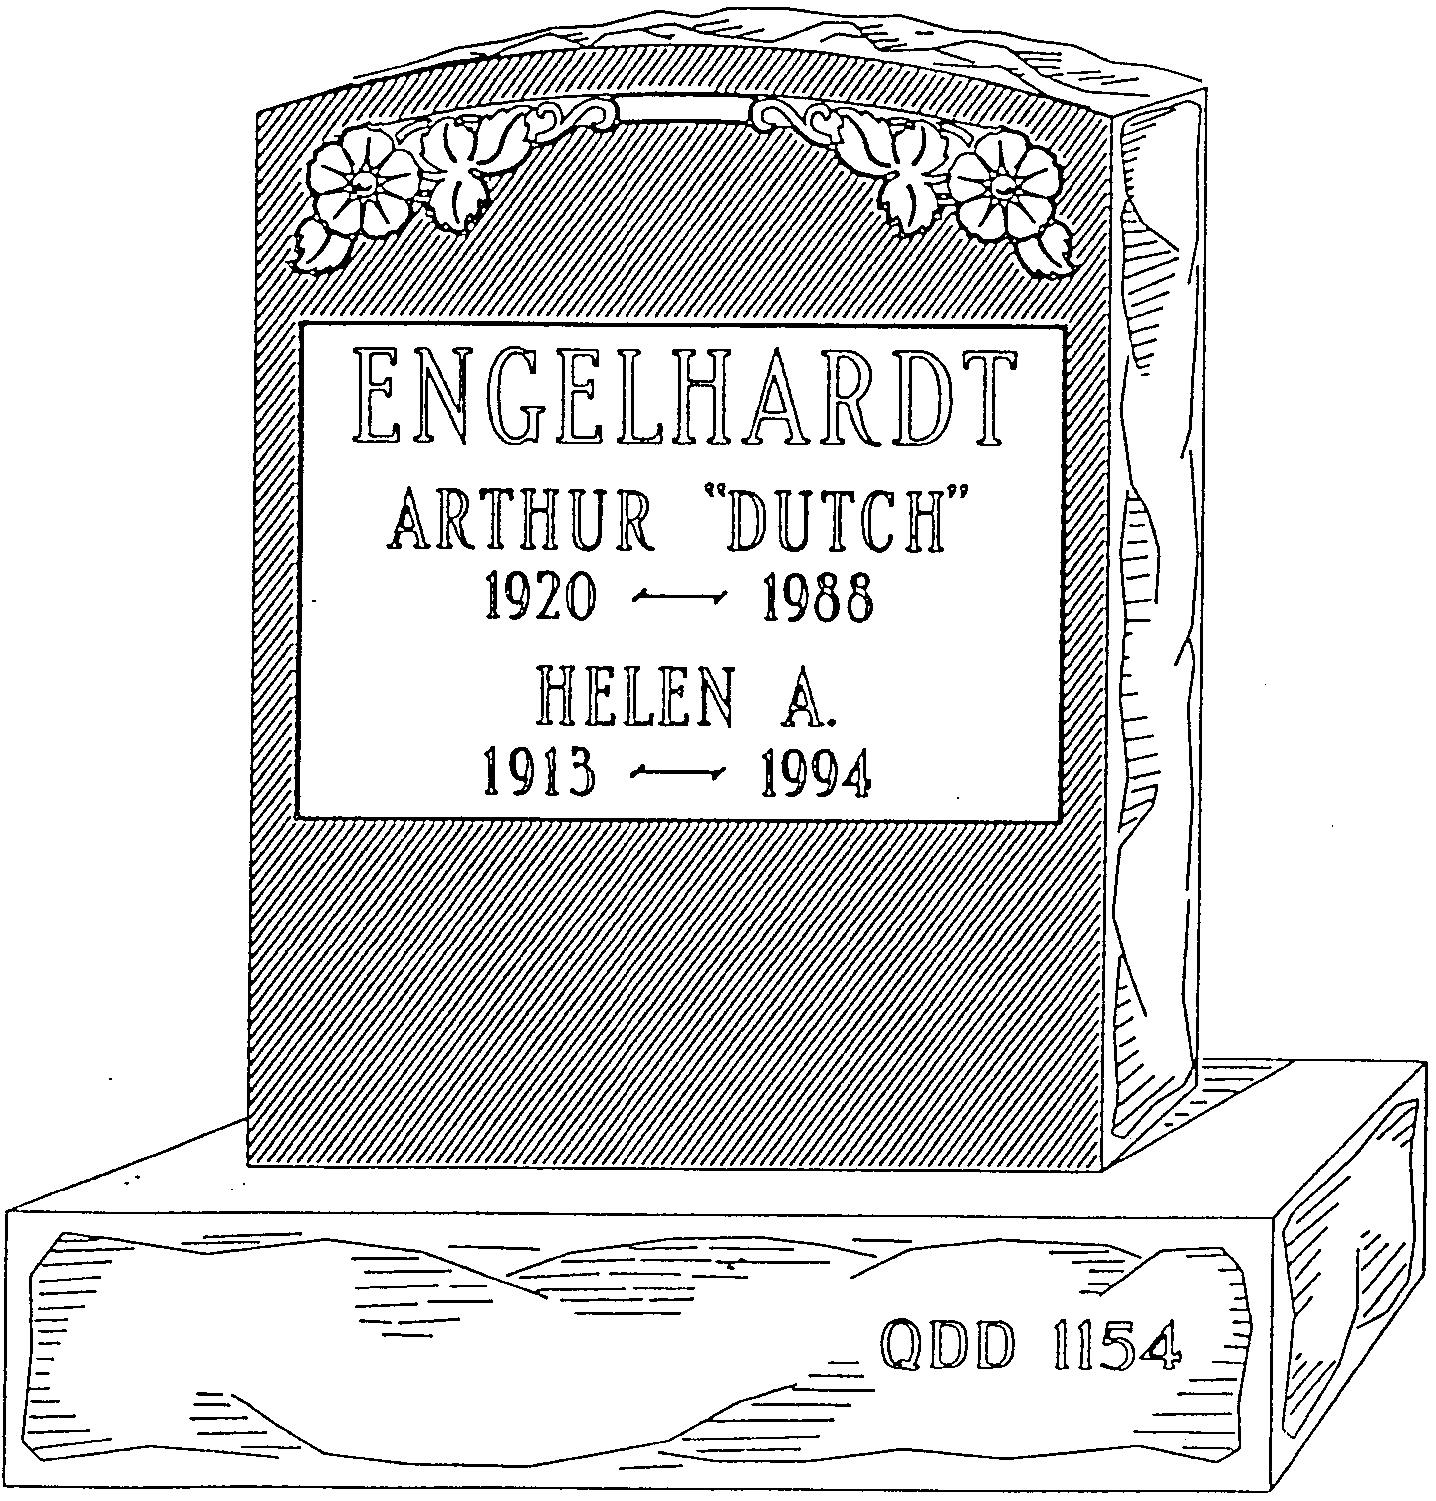 a black and white drawing of a gravestone for engelhardt arthur dutch